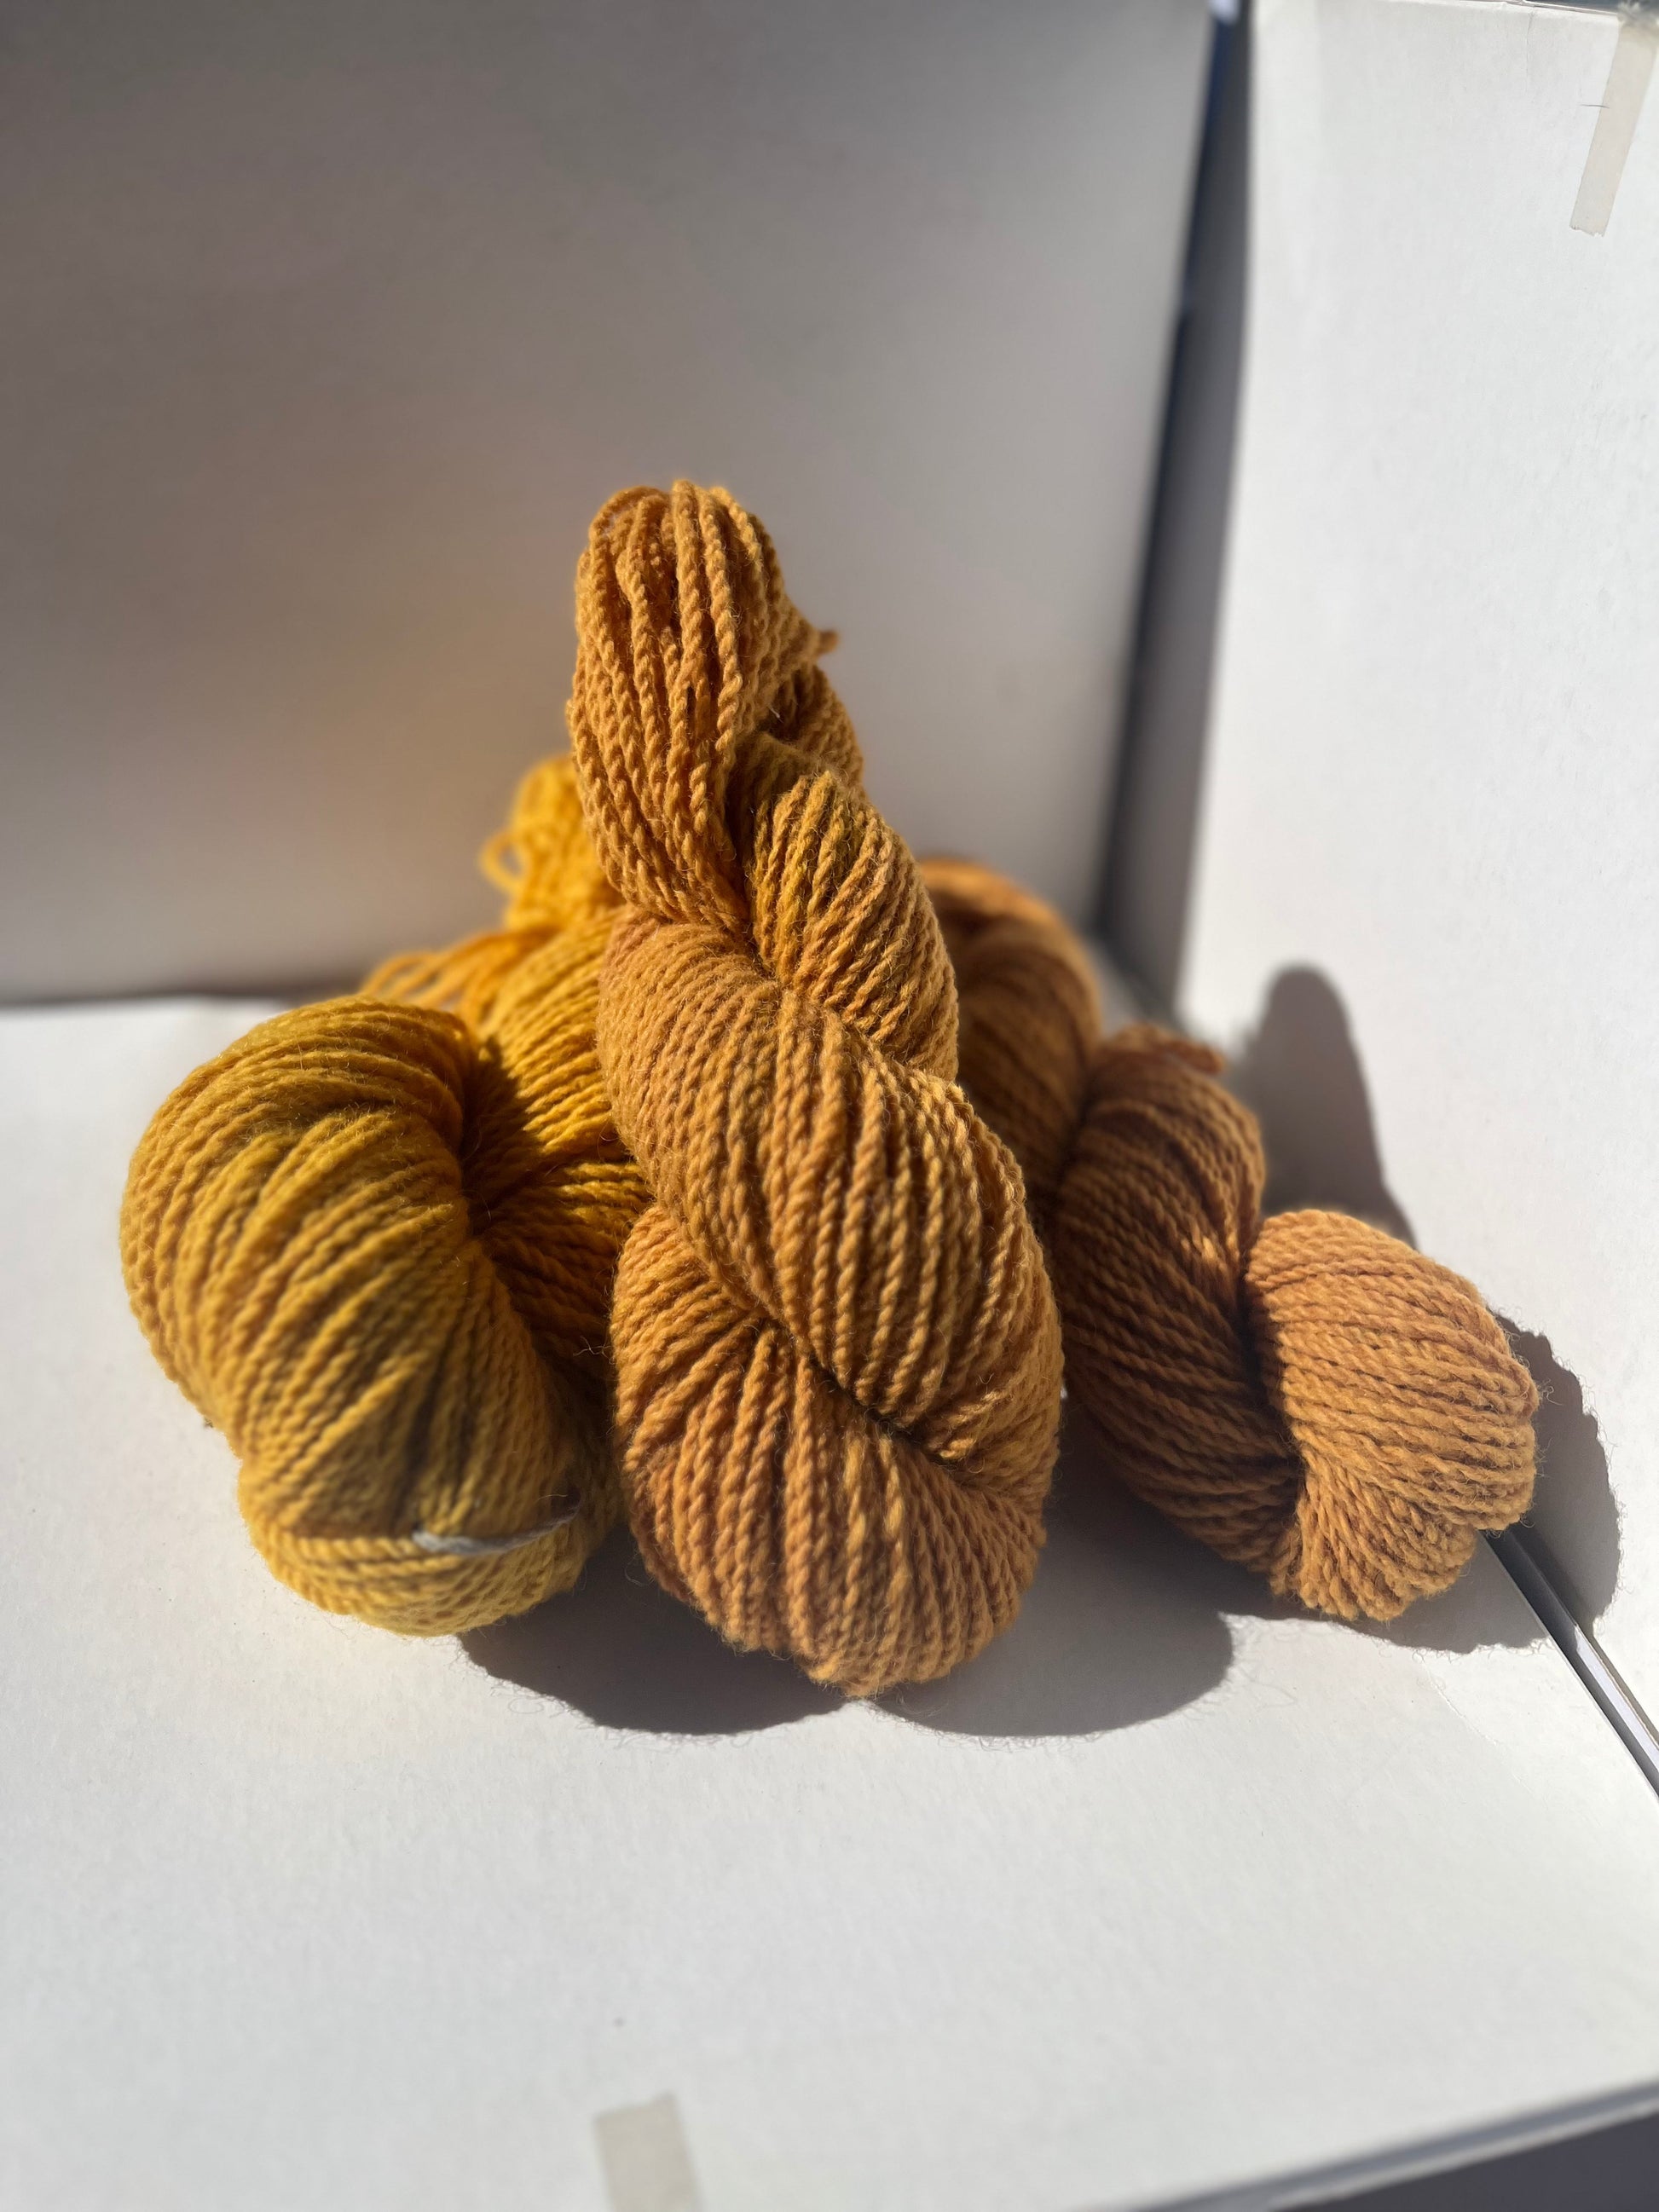 Yarn - Locally Grown Naturally Dyed 2 Ply | Worsted | 220 Yards / 120g